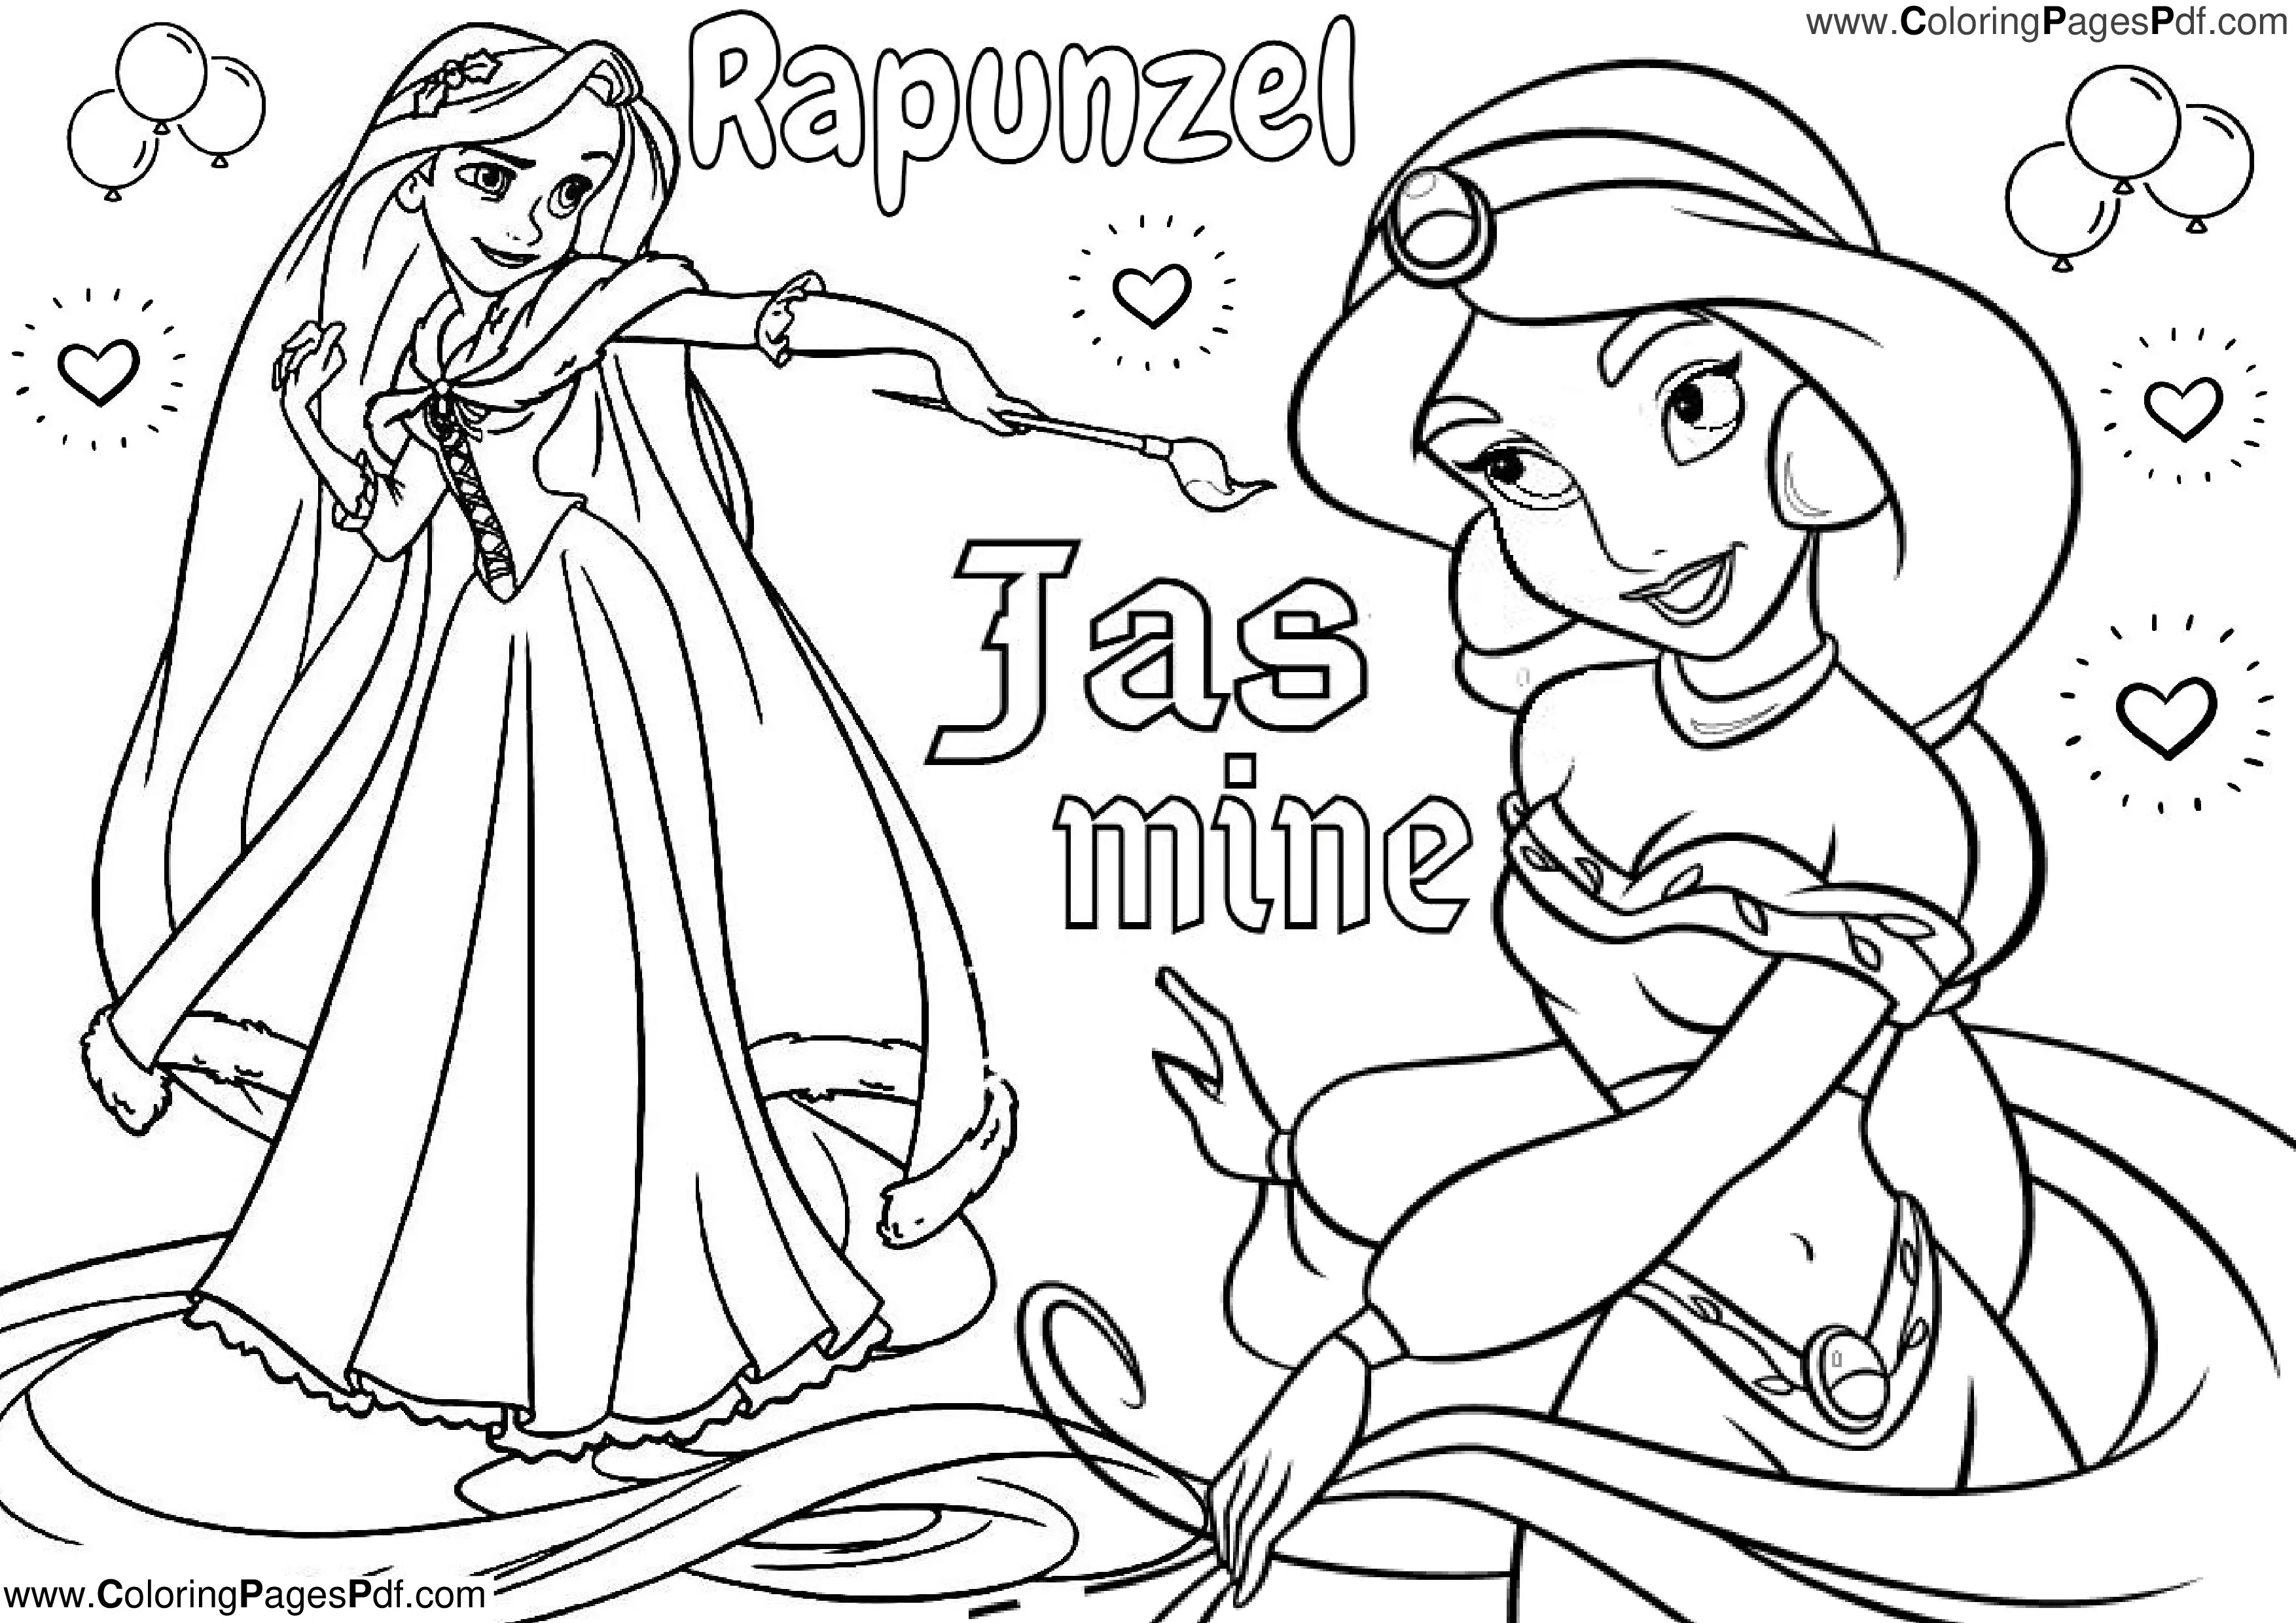 rapunzel coloring pages free,free printable ariel coloring pages,belle coloring pages,ariel coloring pages free,ariel coloring pages,ariel colouring,belle coloring,elsa coloring pages,elsa coloring,elsa and anna coloring pages,elsa coloring pages free,elsa printable coloring pages,elsa colouring book